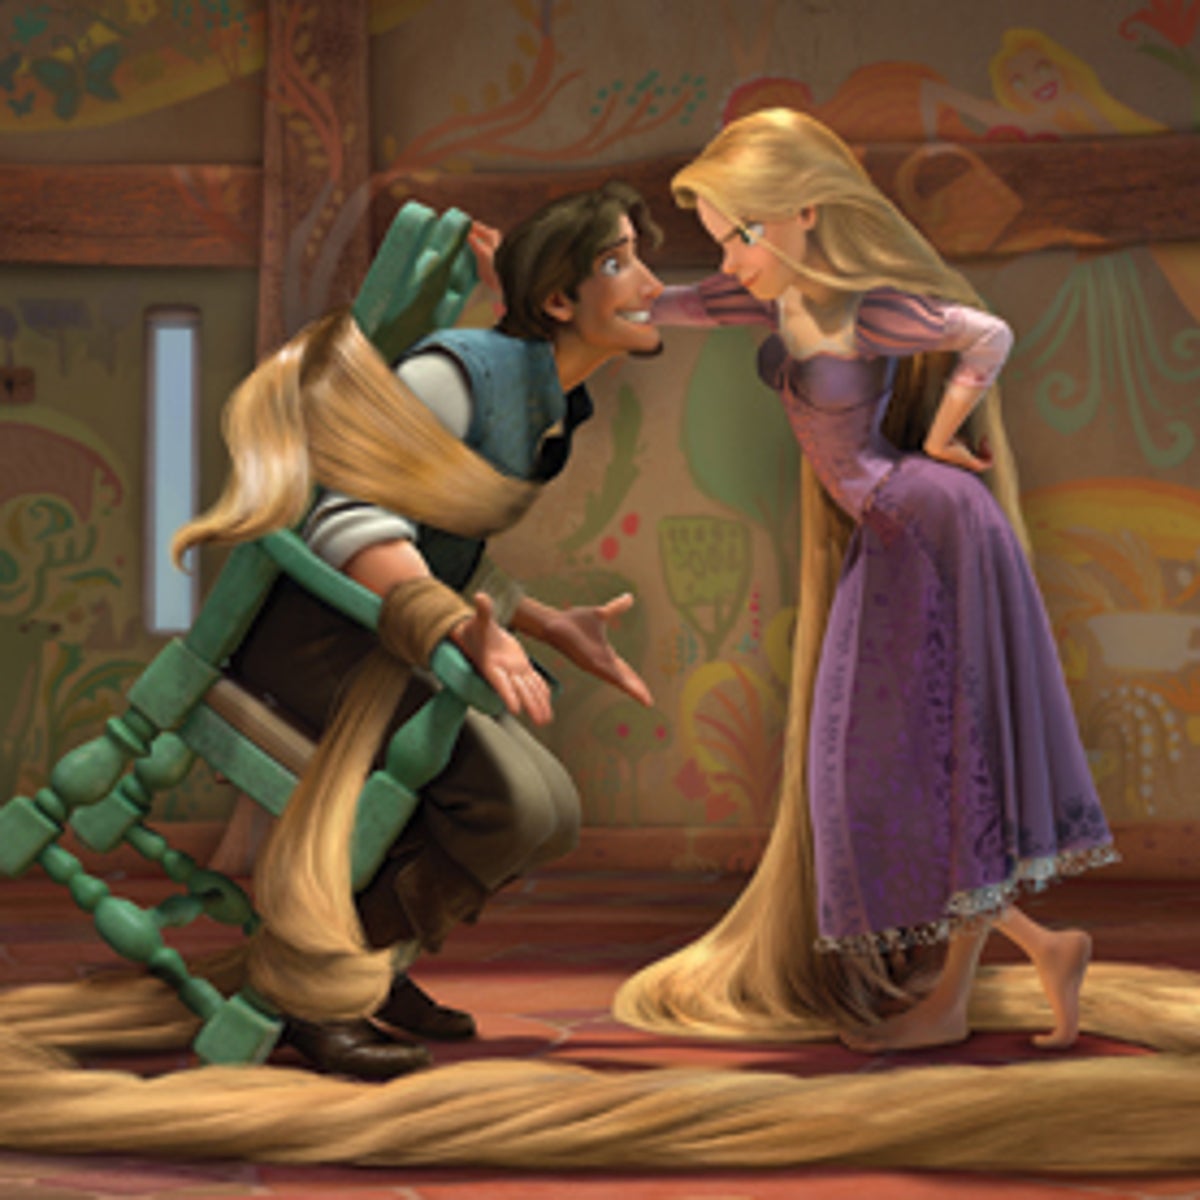 In Disney's Tangled, was Rapunzel called Rapunzel by her